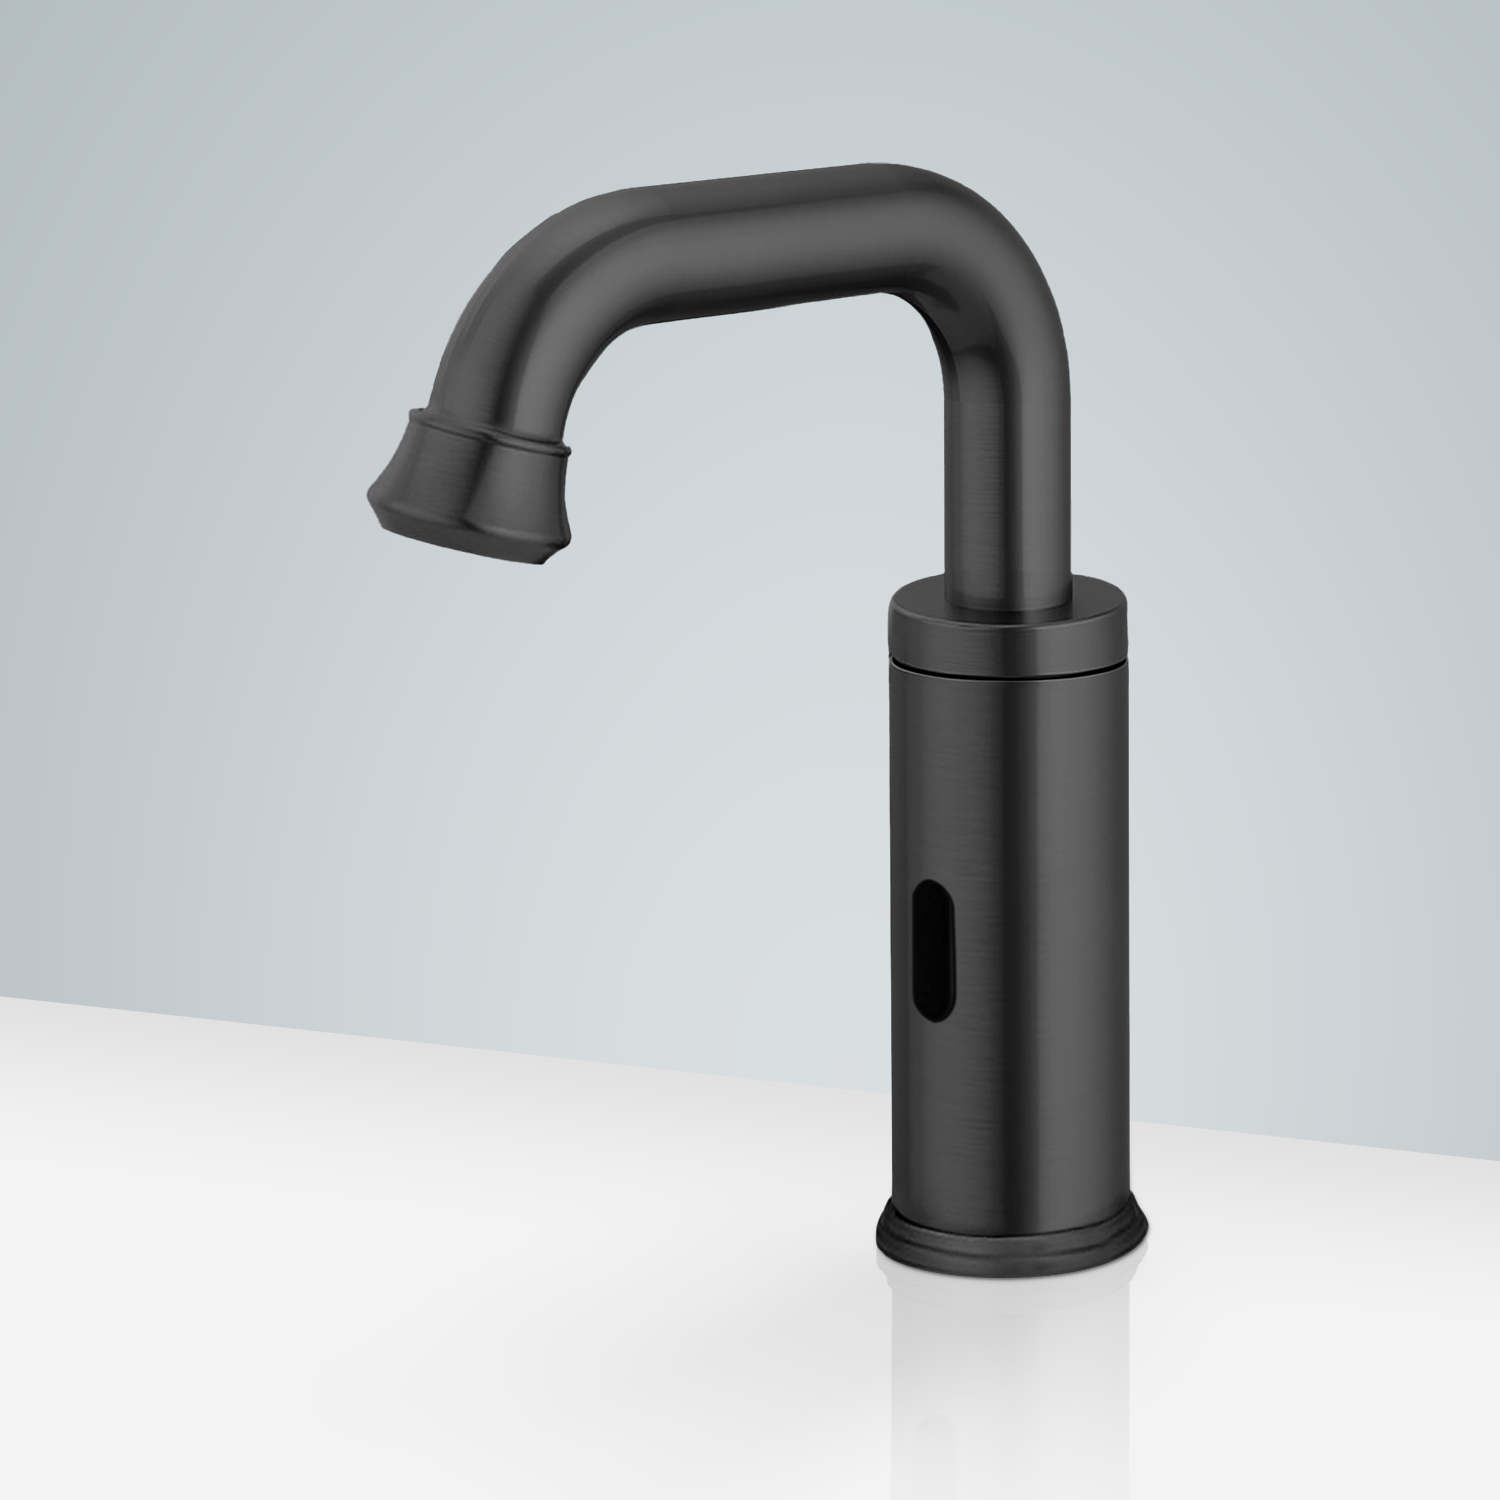 Fontana Commercial Dark Oil Rubbed Bronze Touchless Automatic Sensor Faucet